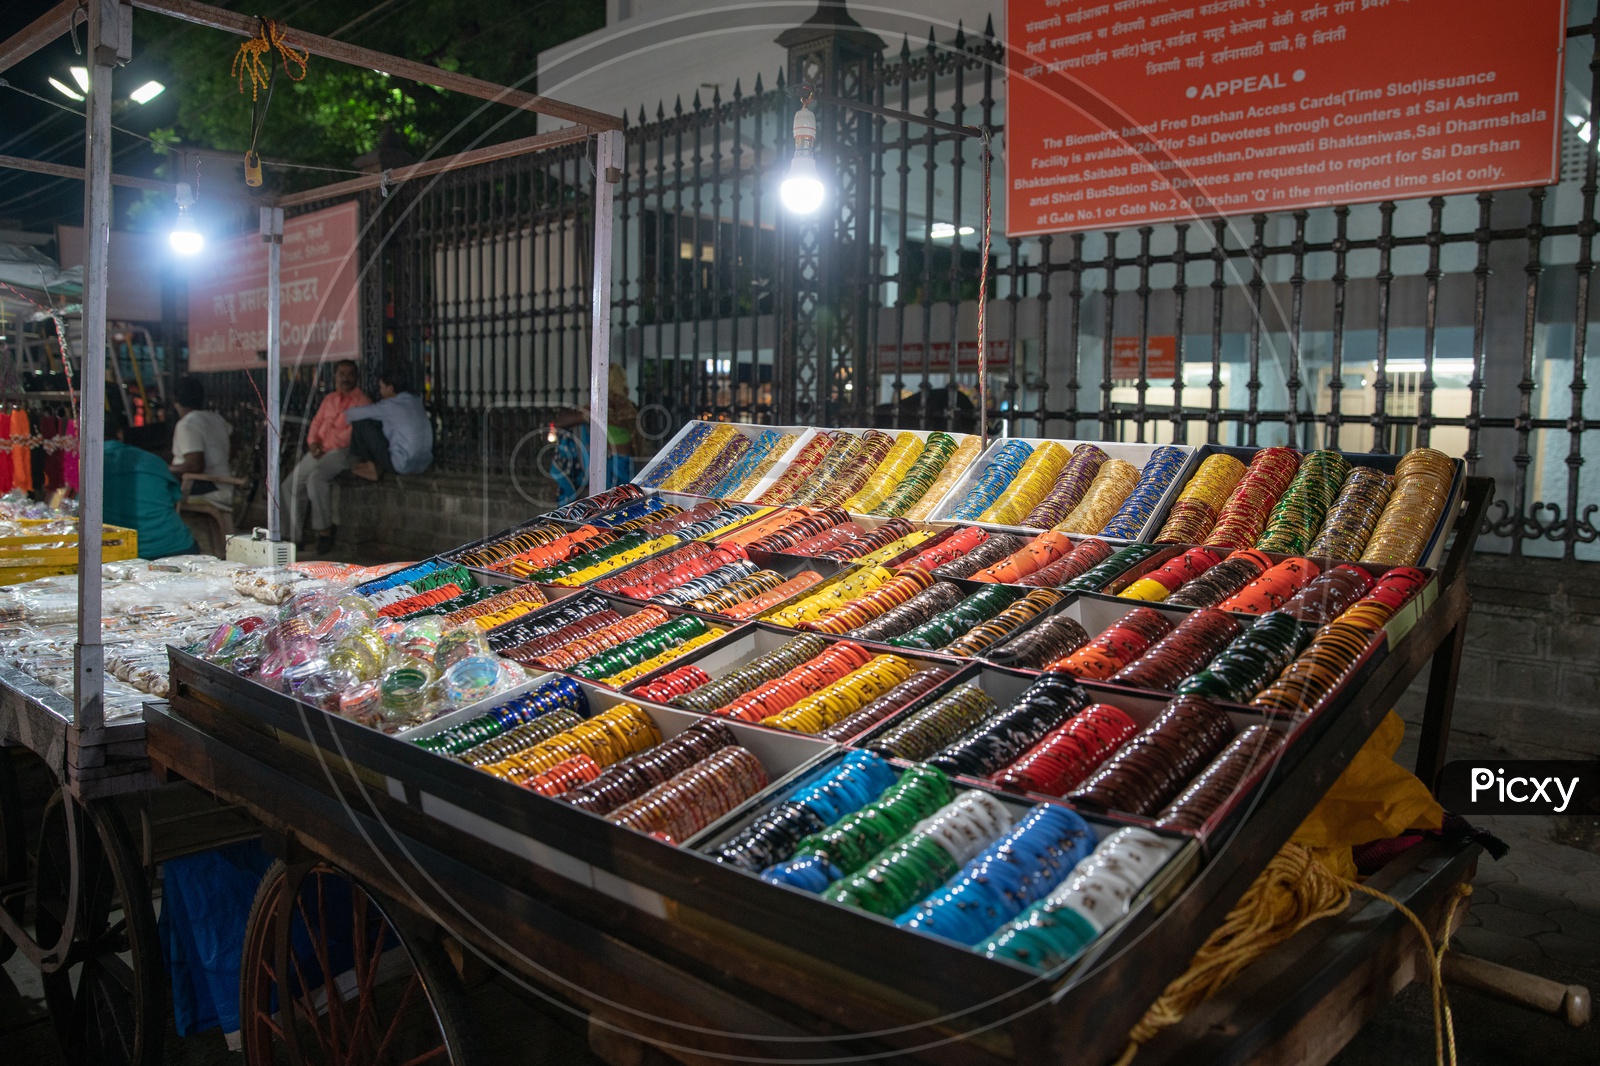 Bangles in a vendor Stall